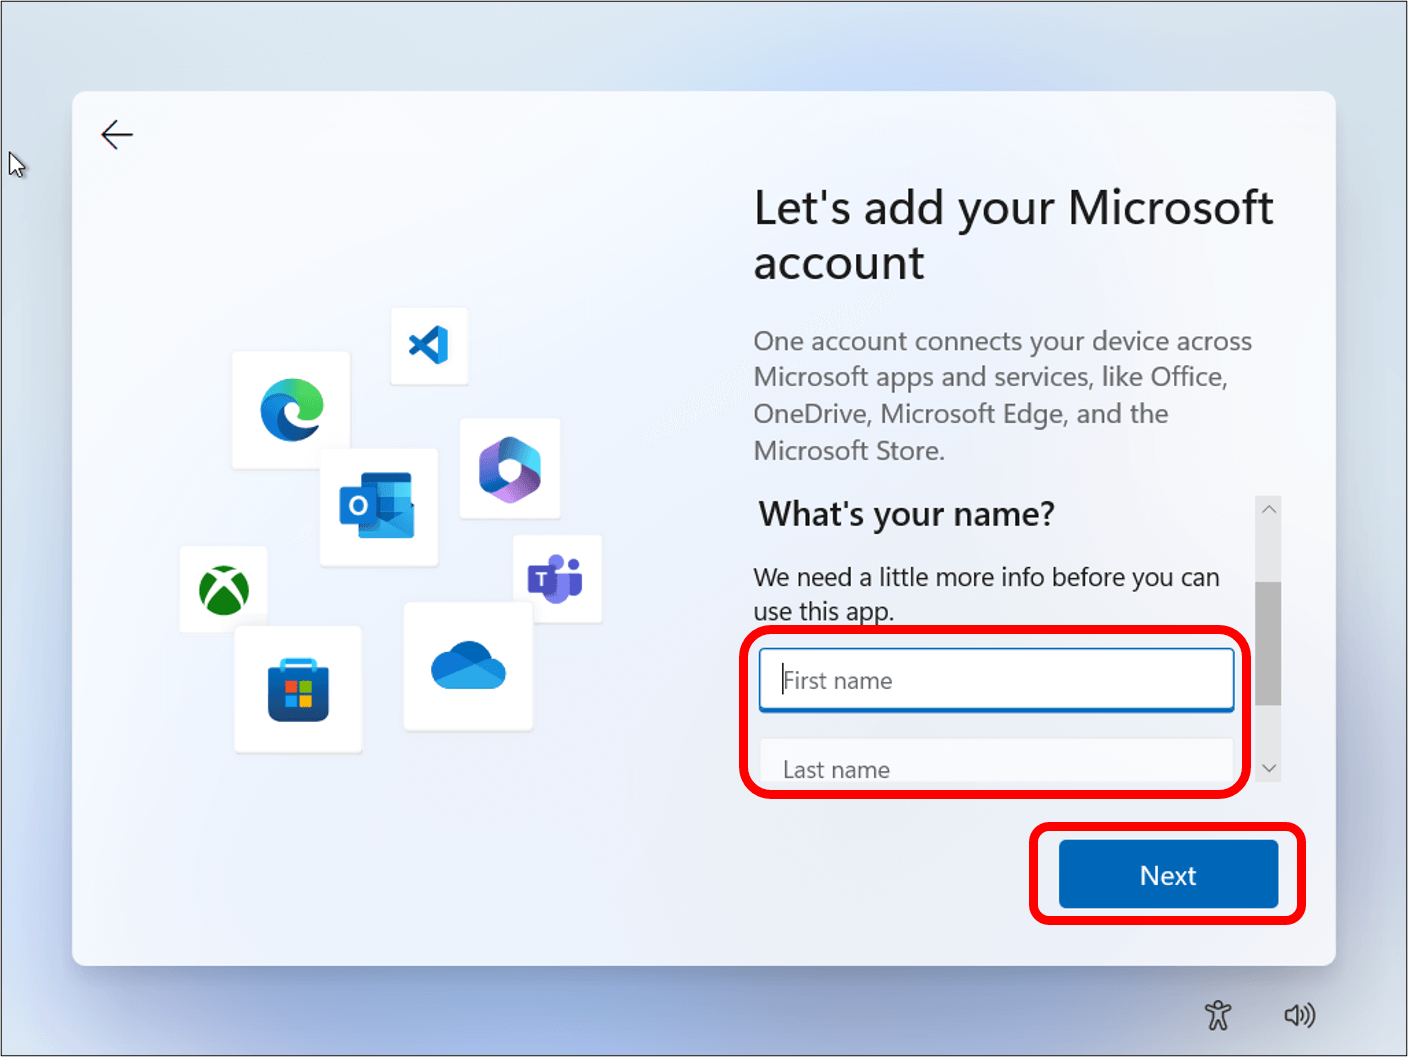 Microsoft account information box highlighted to show where to input First name and Last name with Next highlighted in bottom right corner to continue.